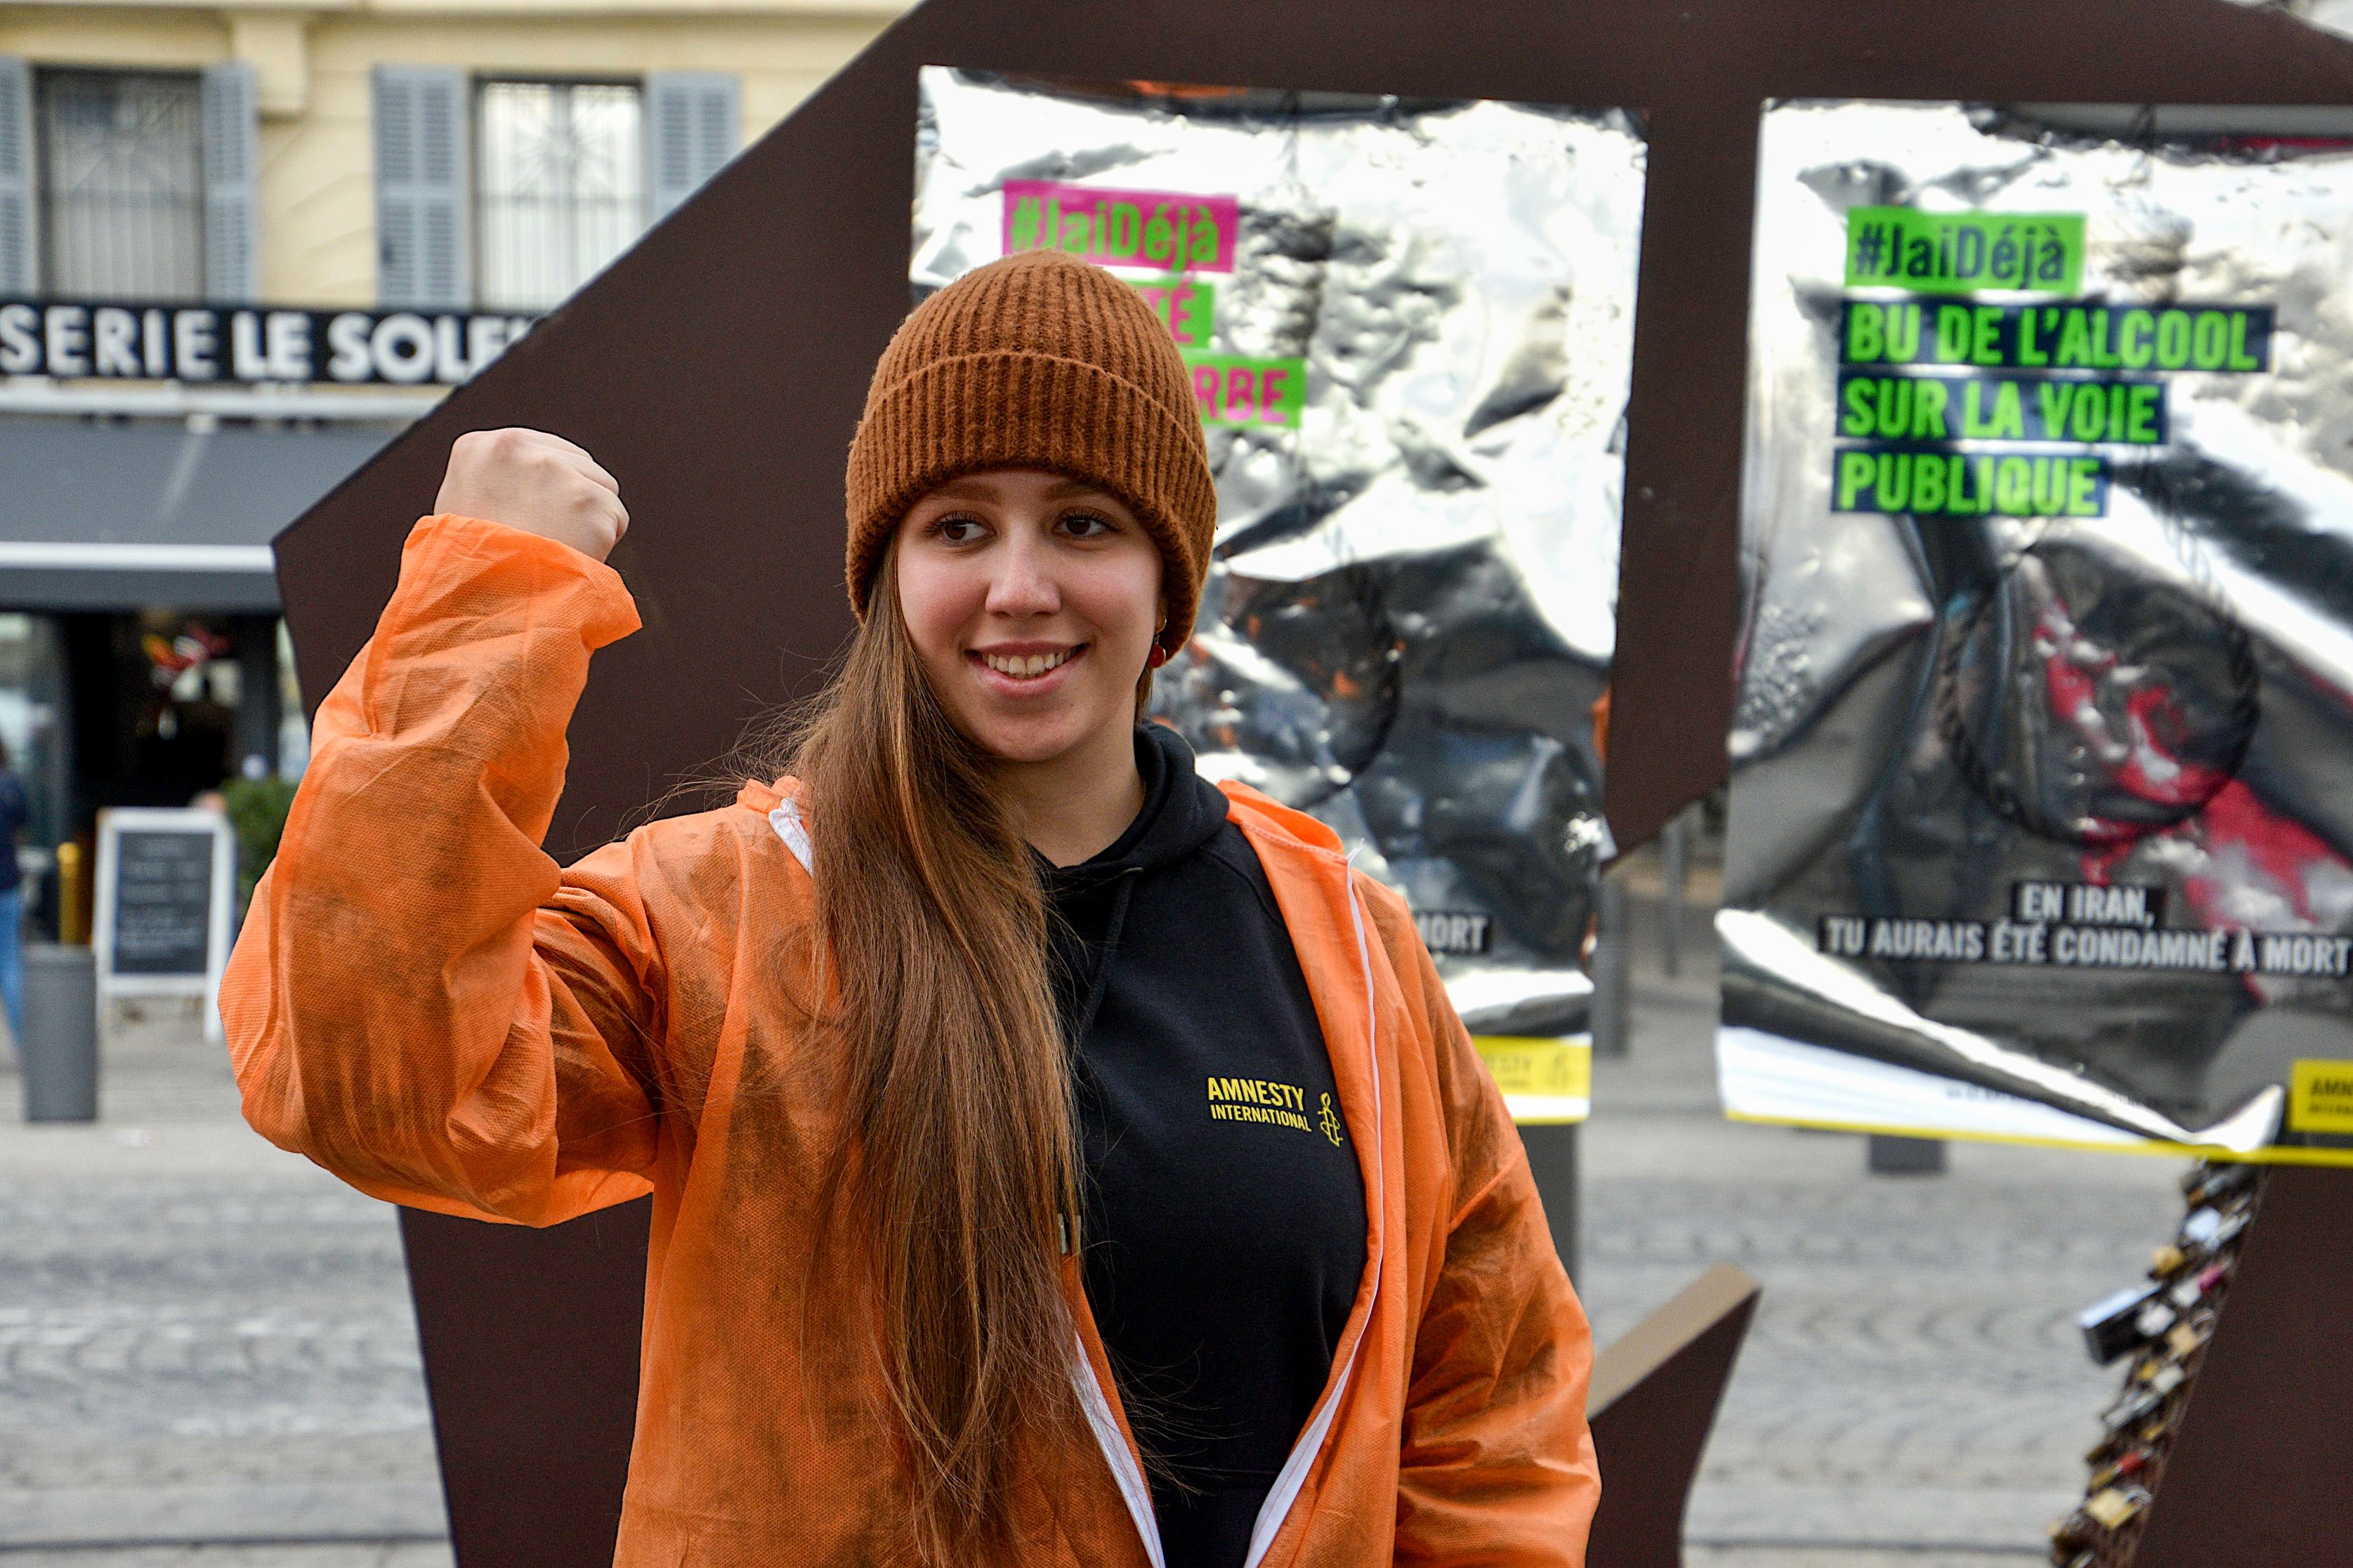 An Amnesty International activist poses in front of posters against the death penalty.